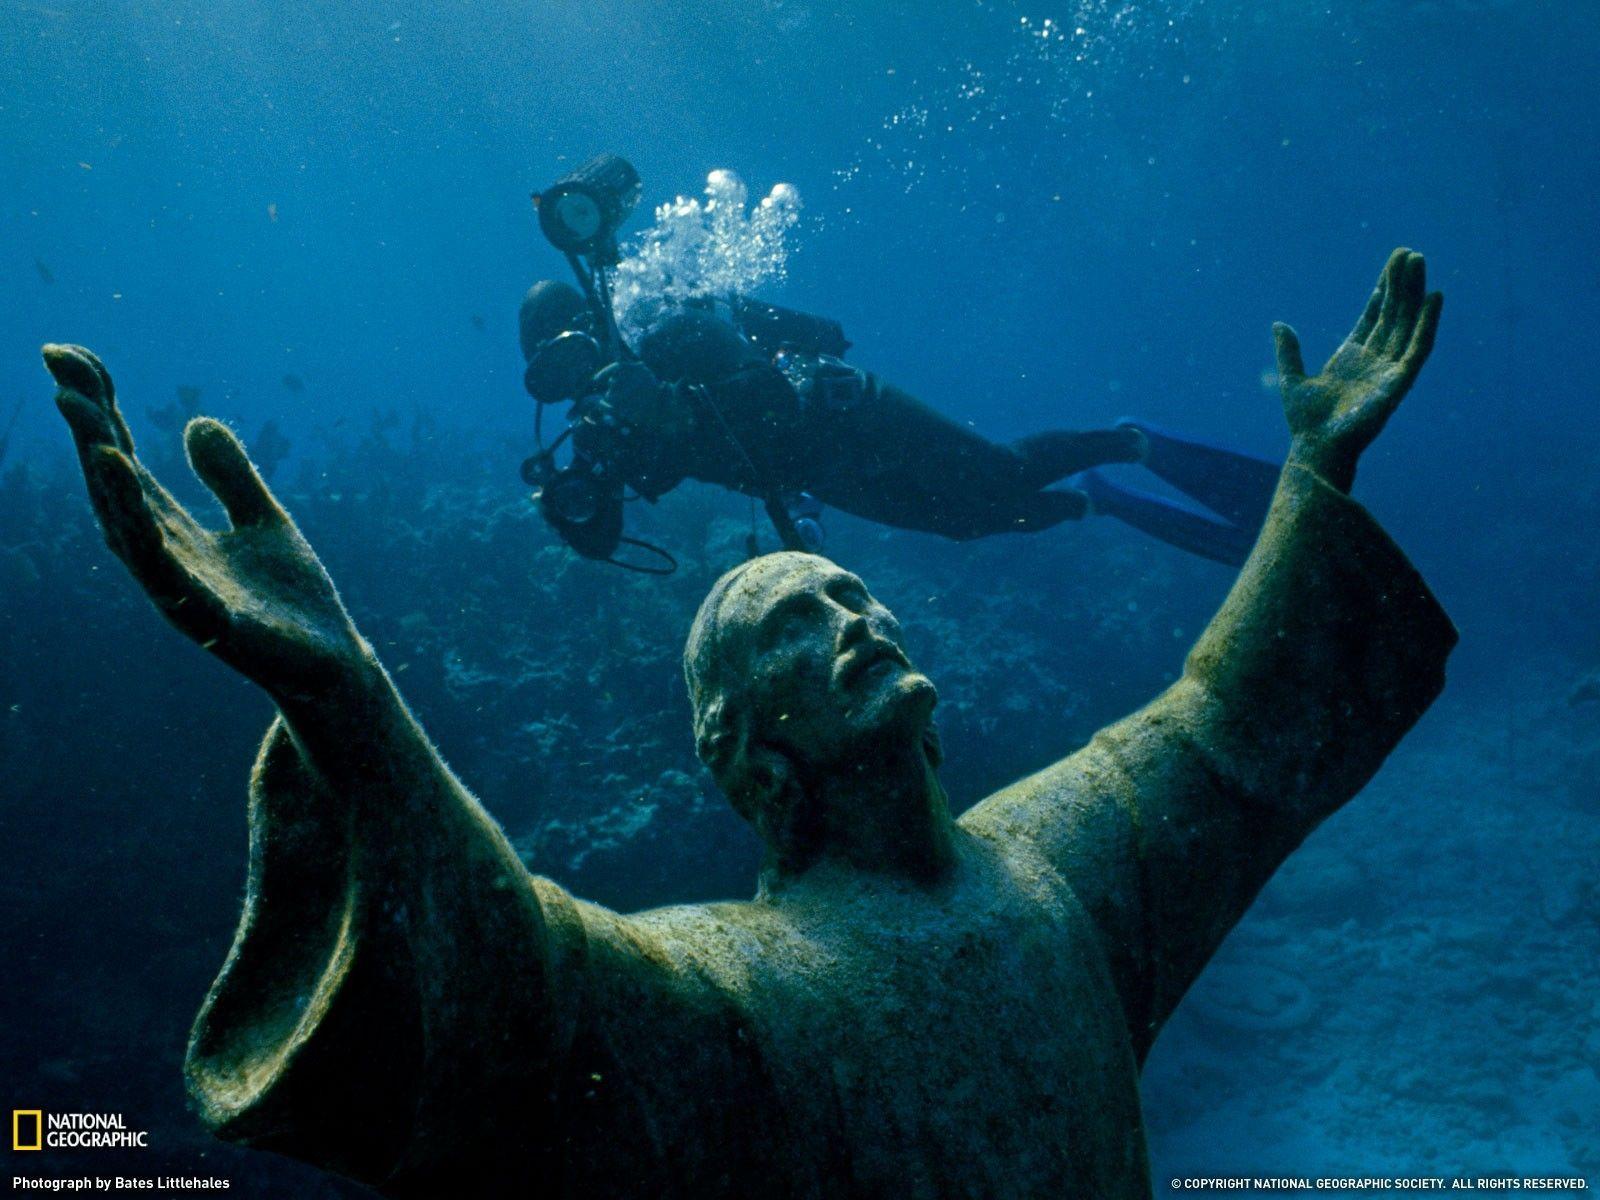 Statue at the bottom of the sea wallpaper and image